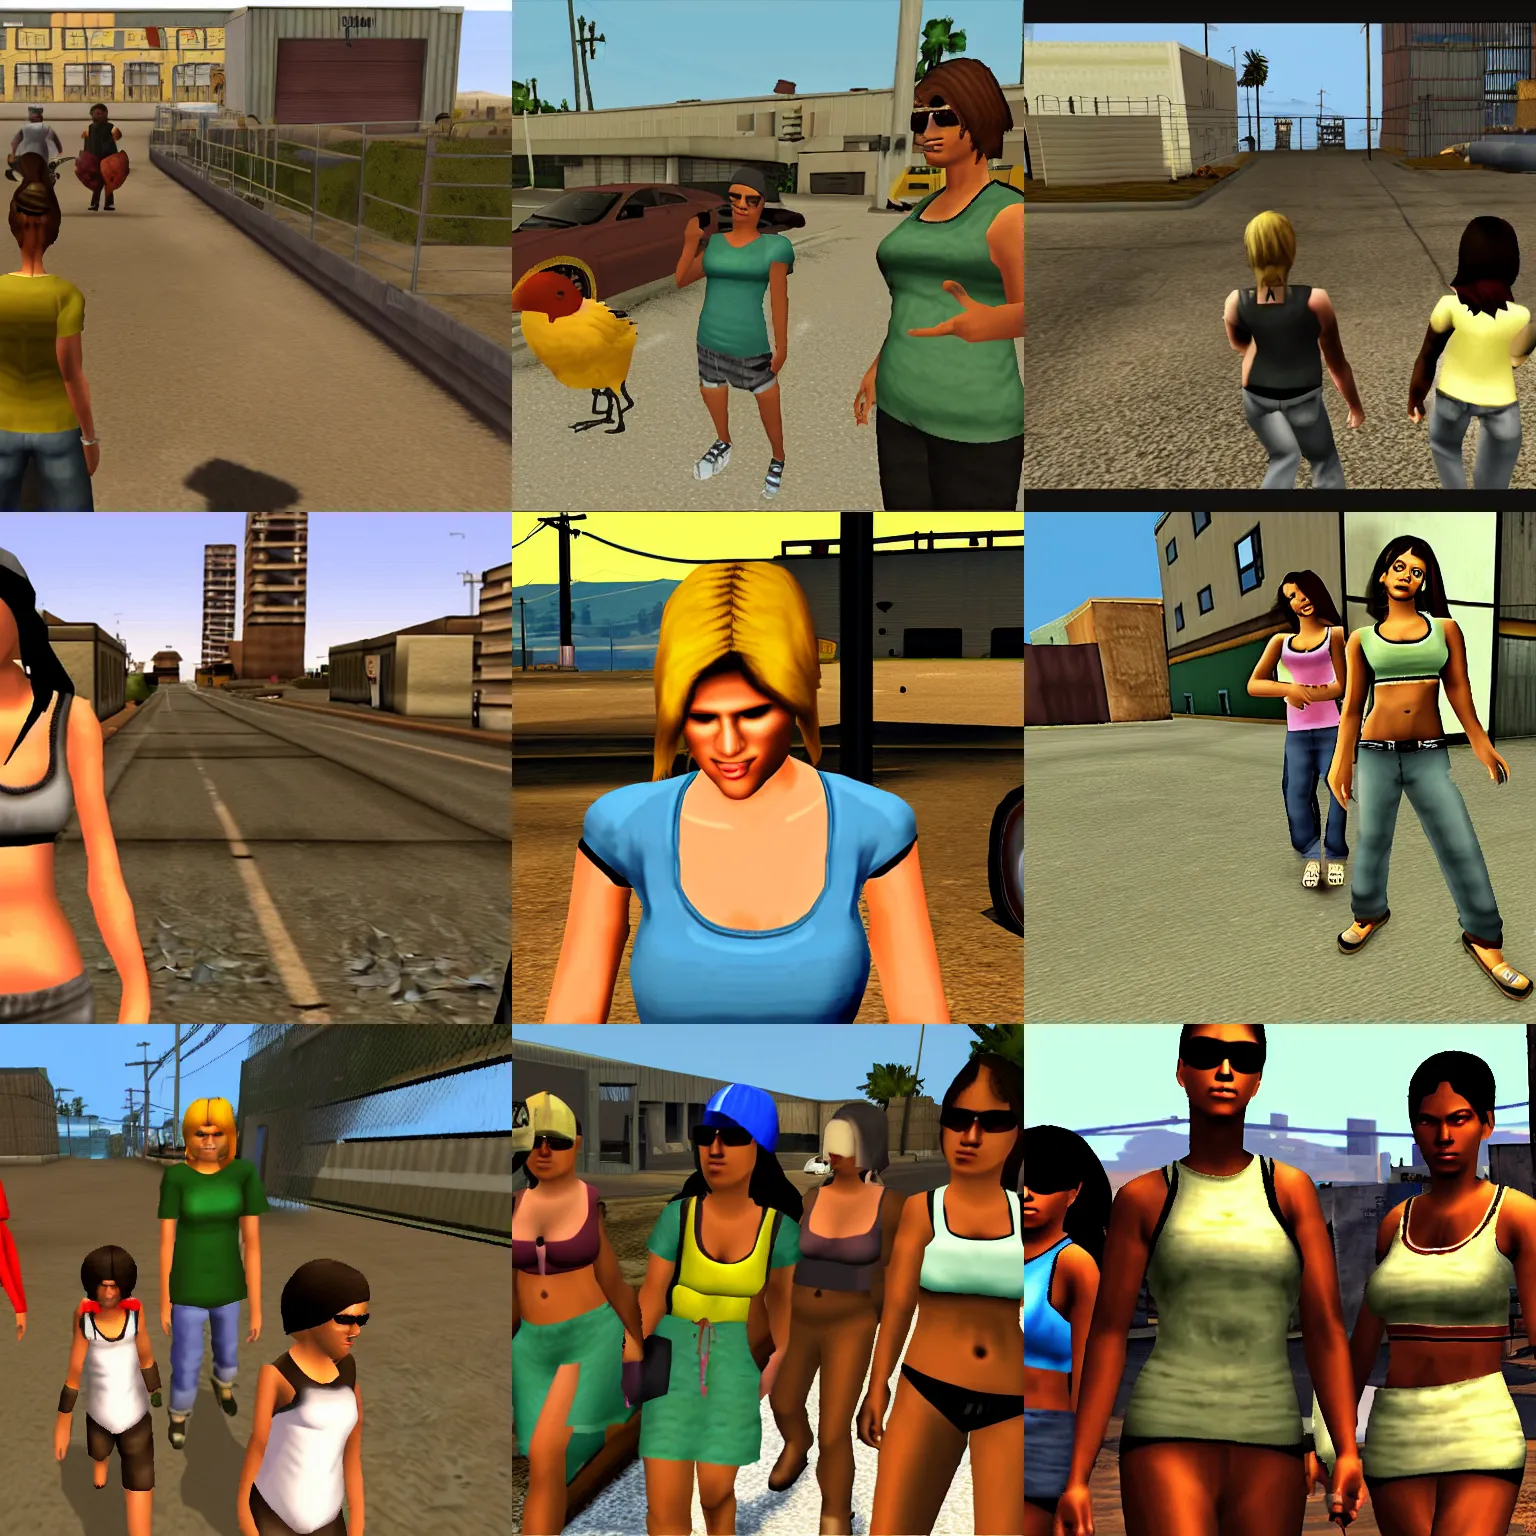 Prompt: screenshot of chicks from gta san andreas